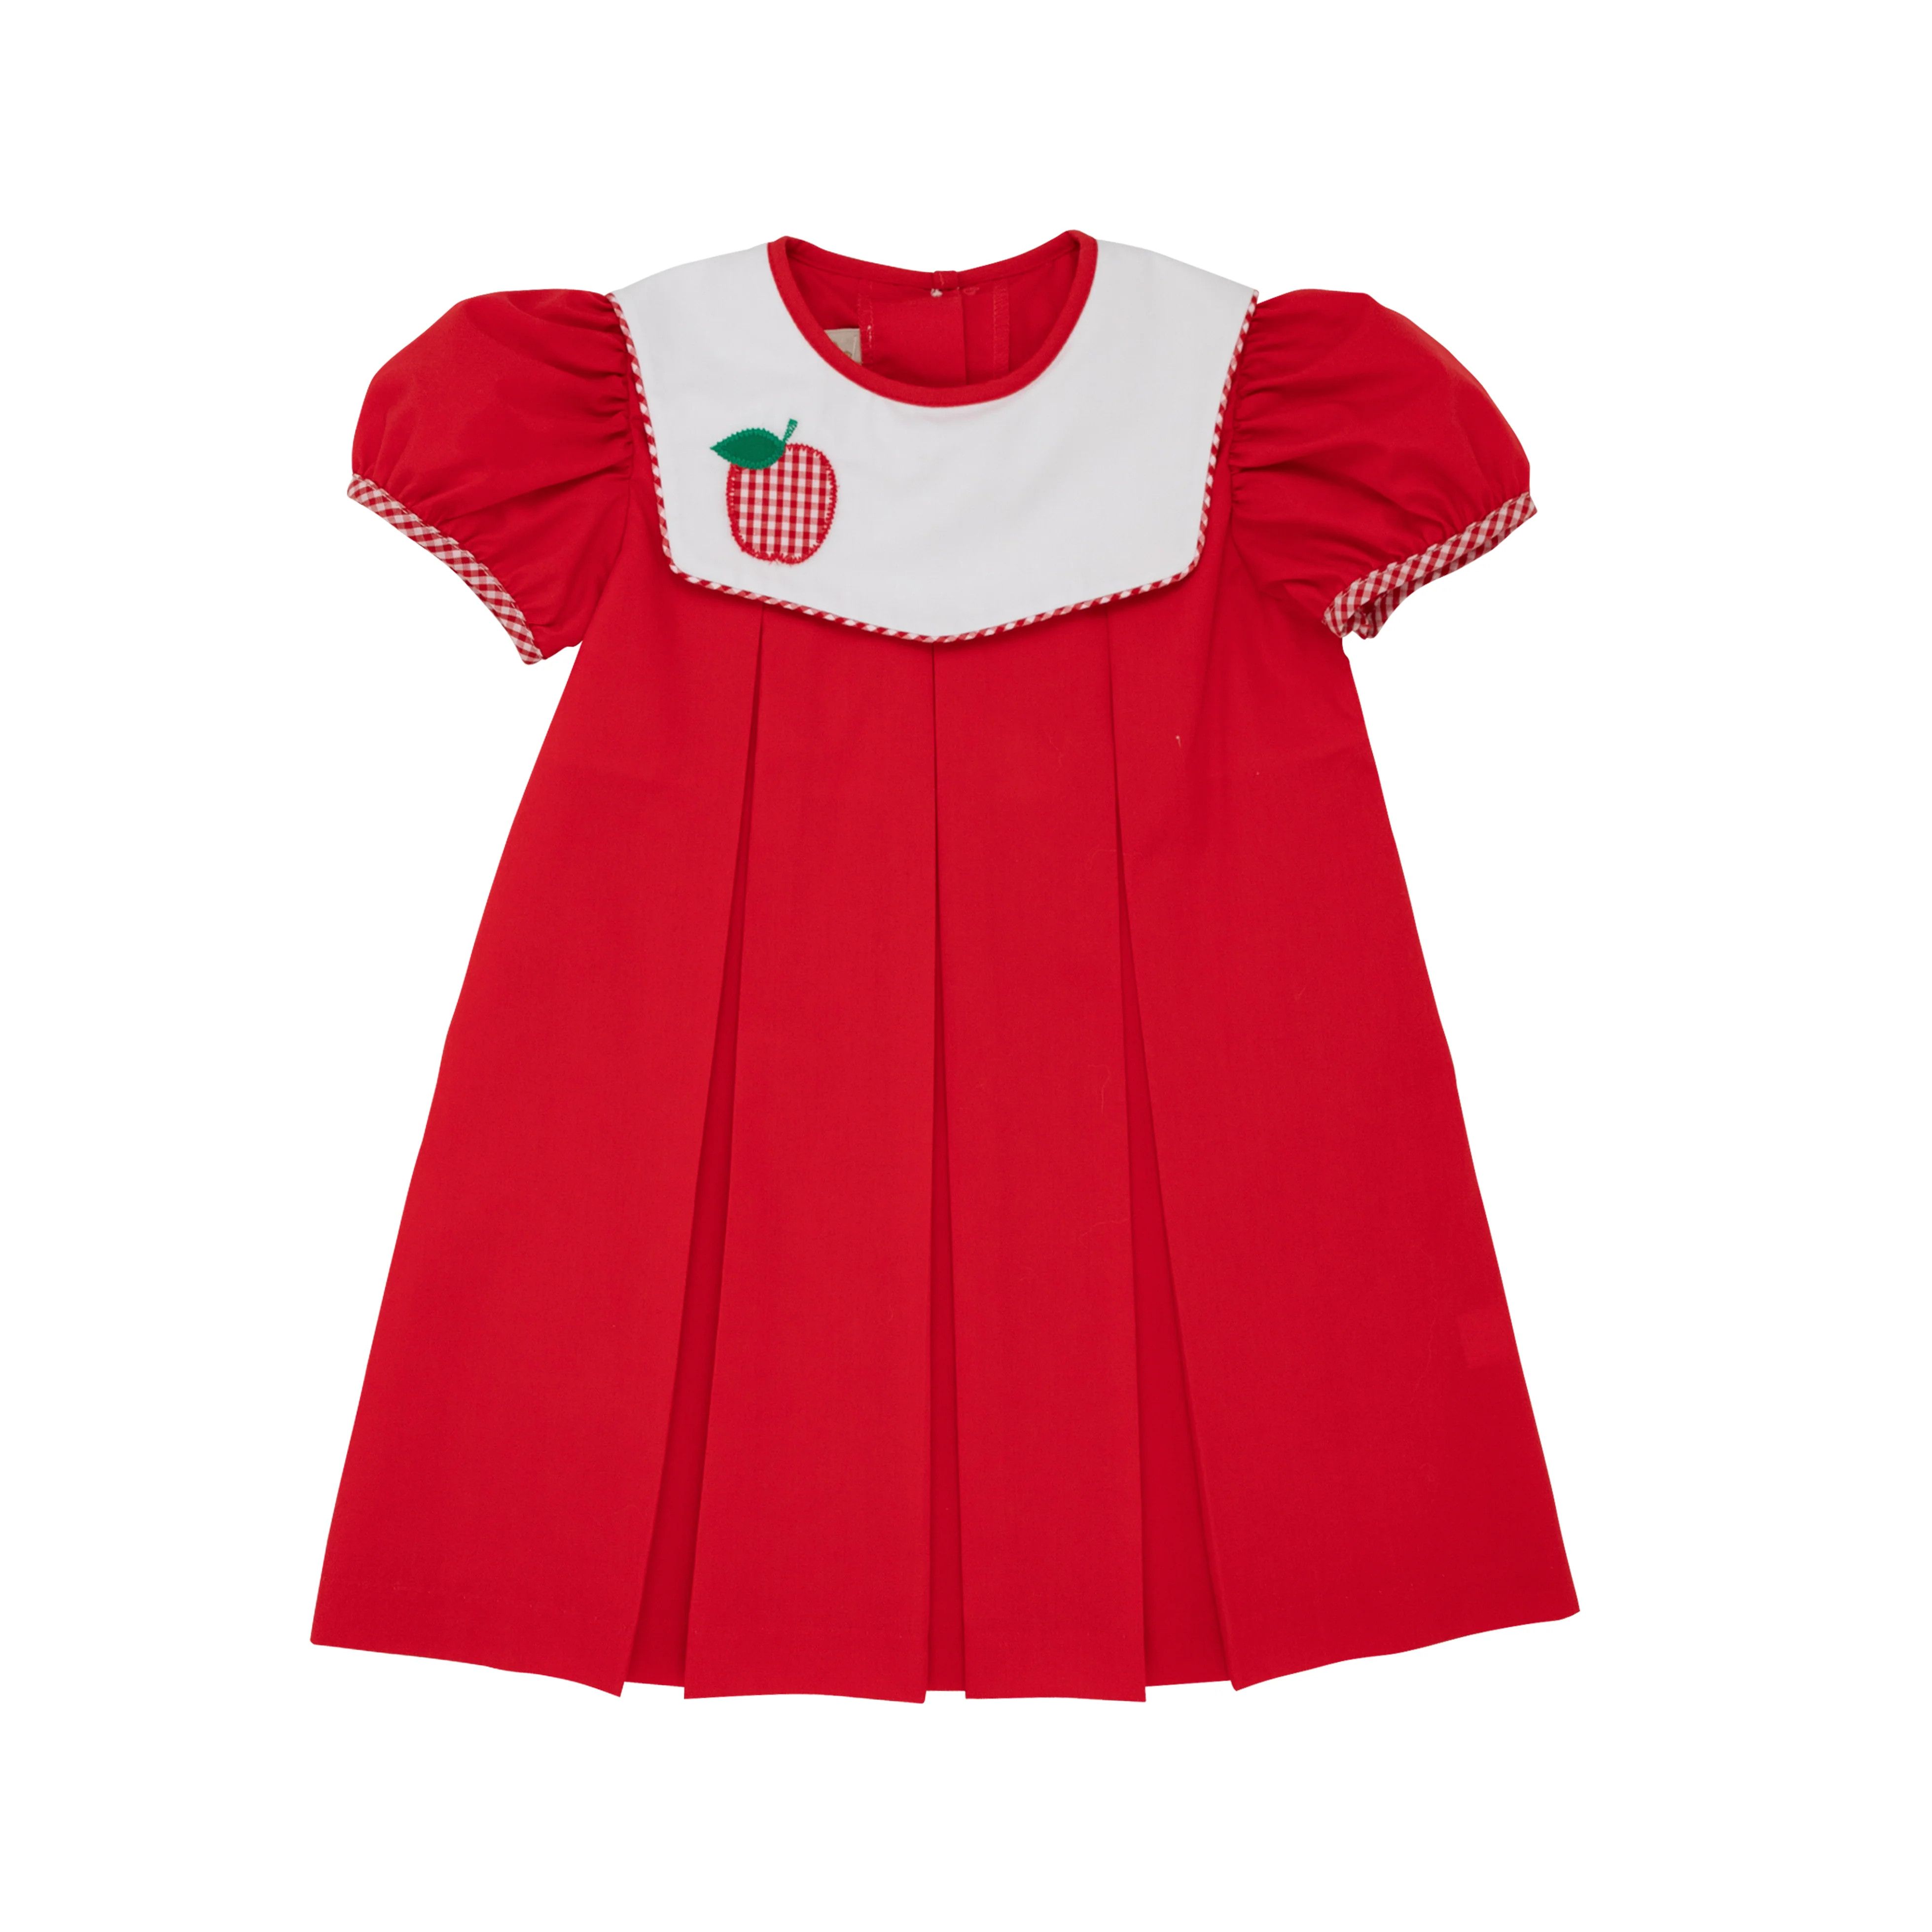 Bunny Phipps Frock - Richmond Red with Worth Avenue White & Richmond Red Mini Gingham | The Beaufort Bonnet Company